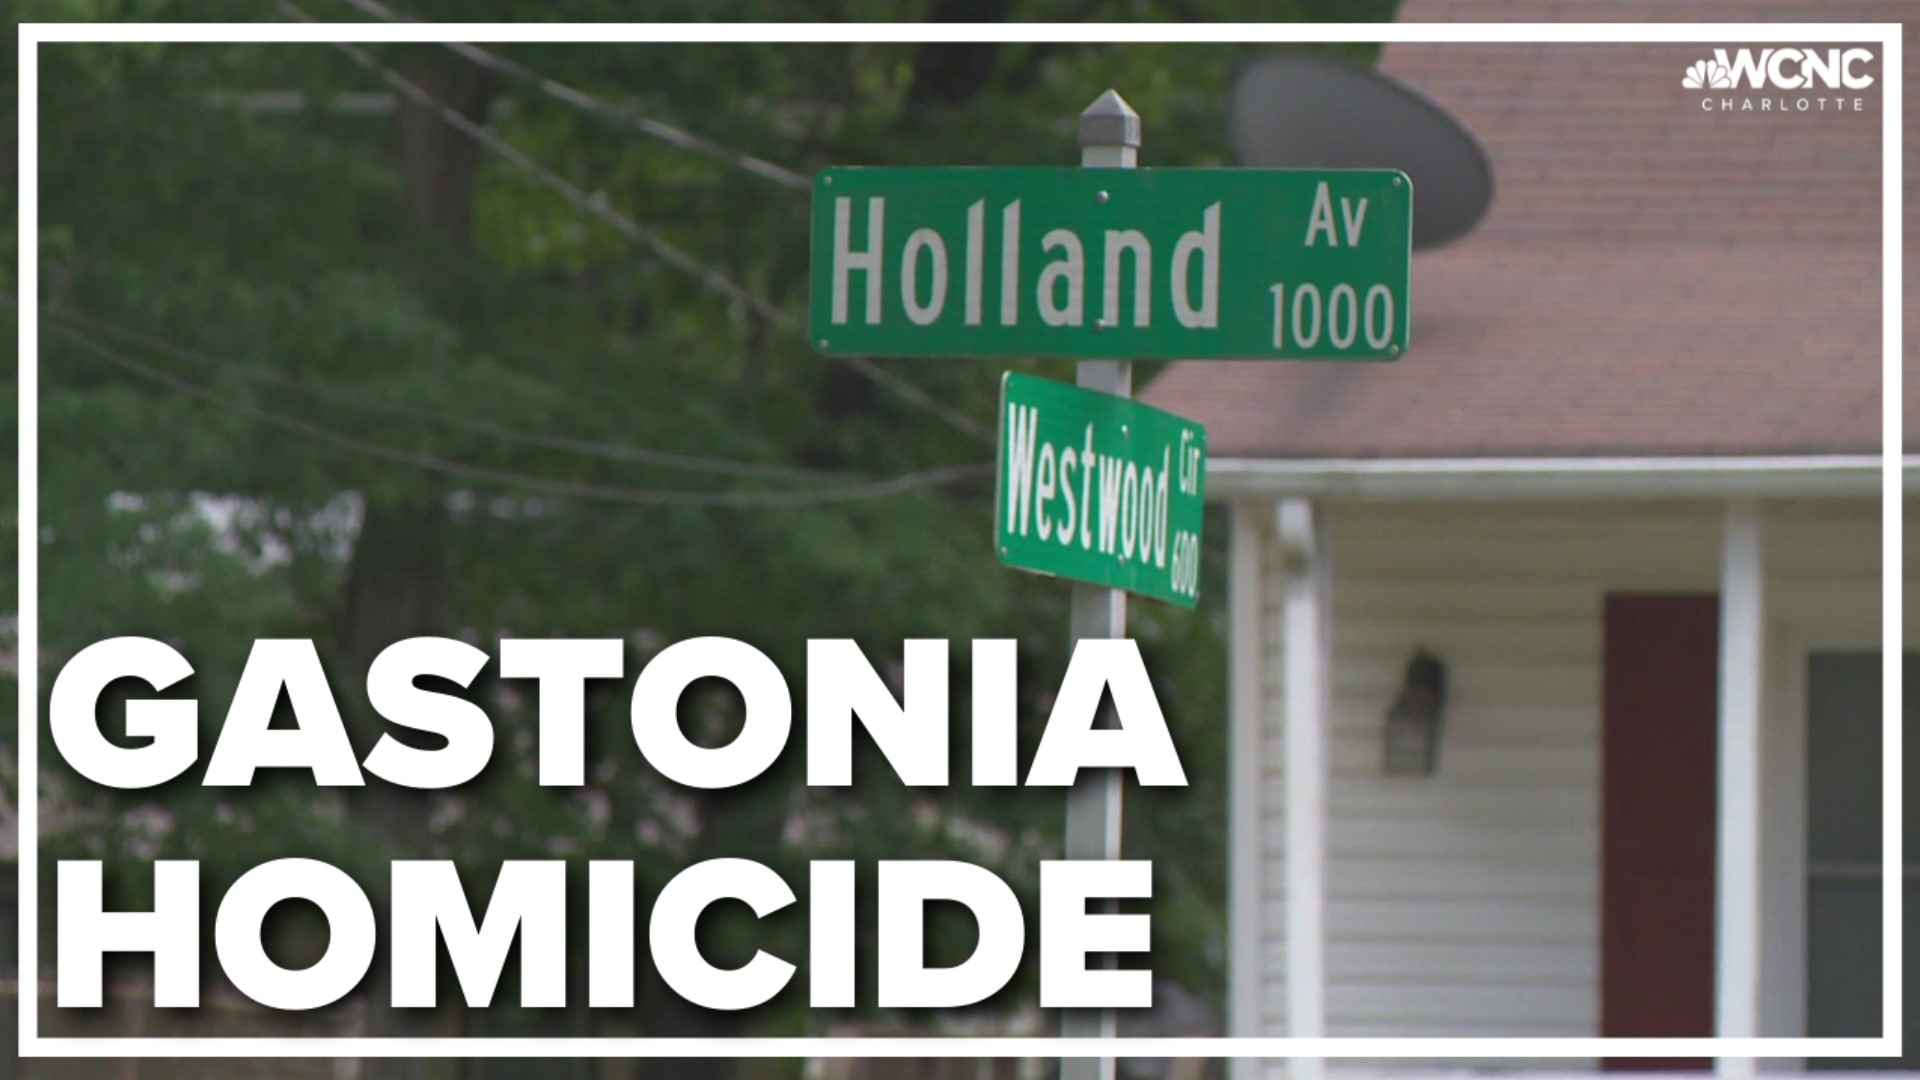 A 19-year-old has died and another 19-year-old was injured after a shooting in Gastonia, according to the Gastonia Police Department.